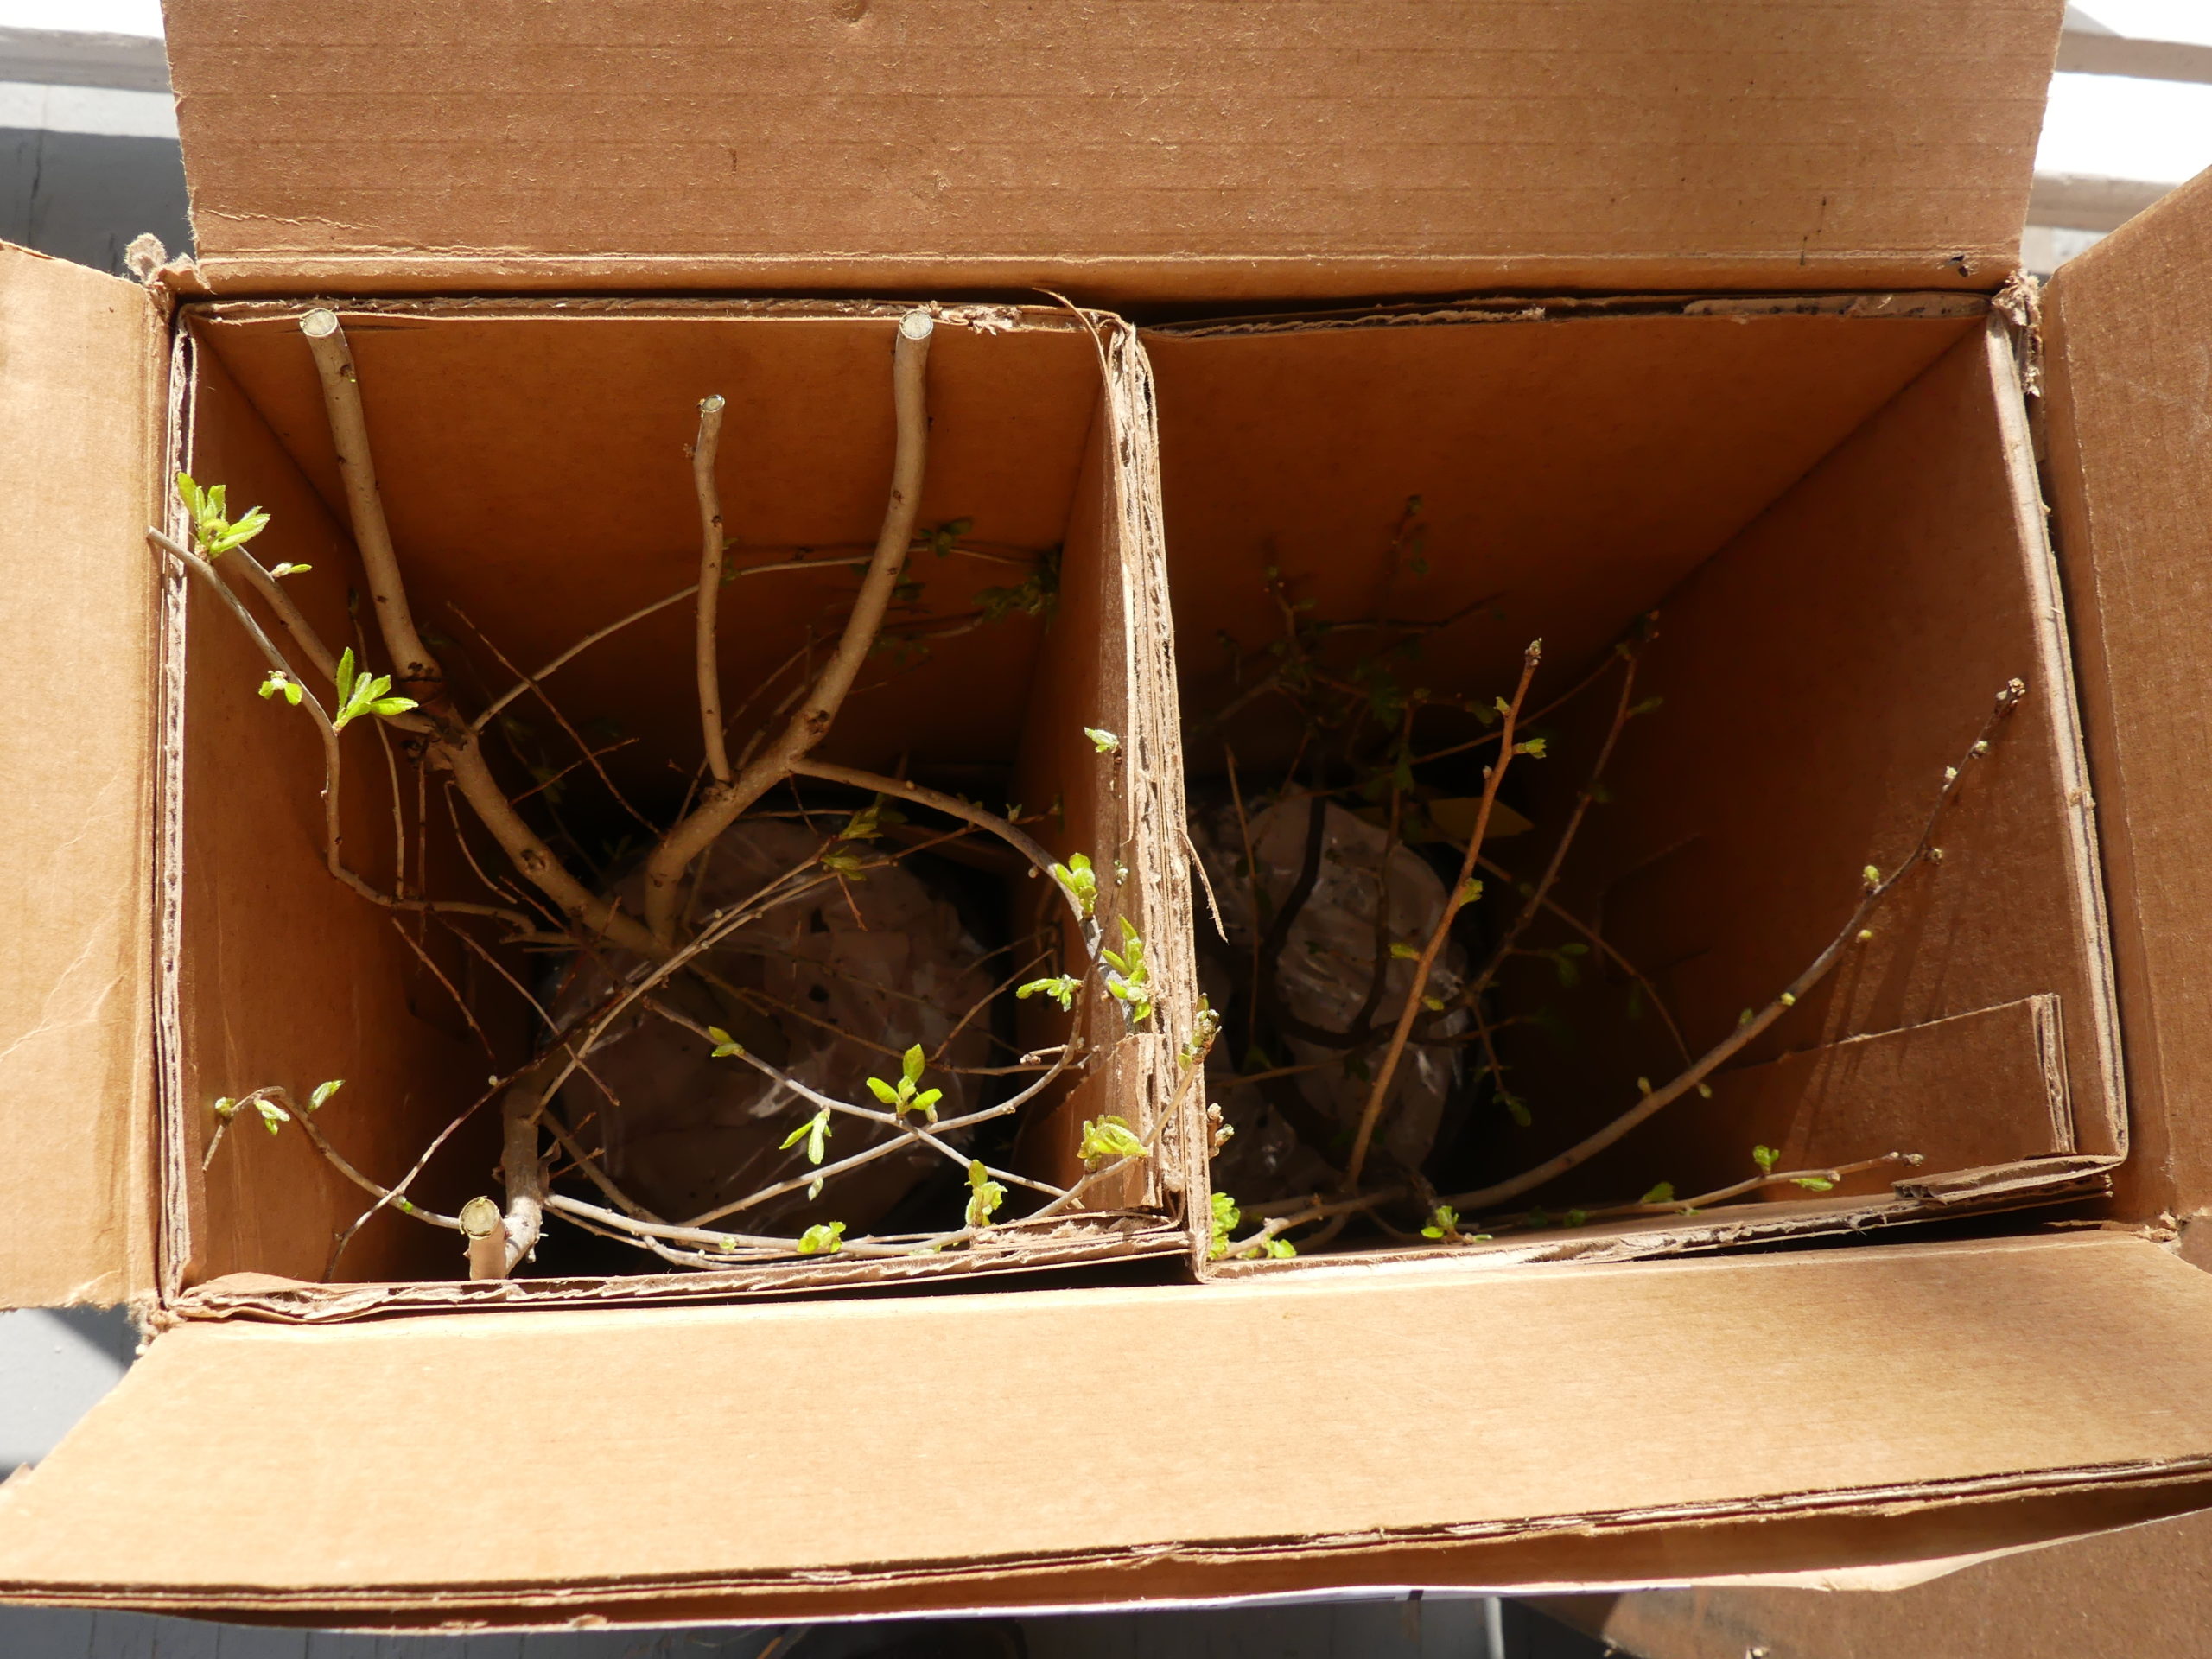 # 637  Two Ilex verticillata with cardboard sleeves inserted into an outer box for shipping.  These one gallon potted plants arrived in perfect shape just coming out of dormancy.  Unboxed, hardened off then planted these winterberries flowered and fruited just months after their arrival and planting.